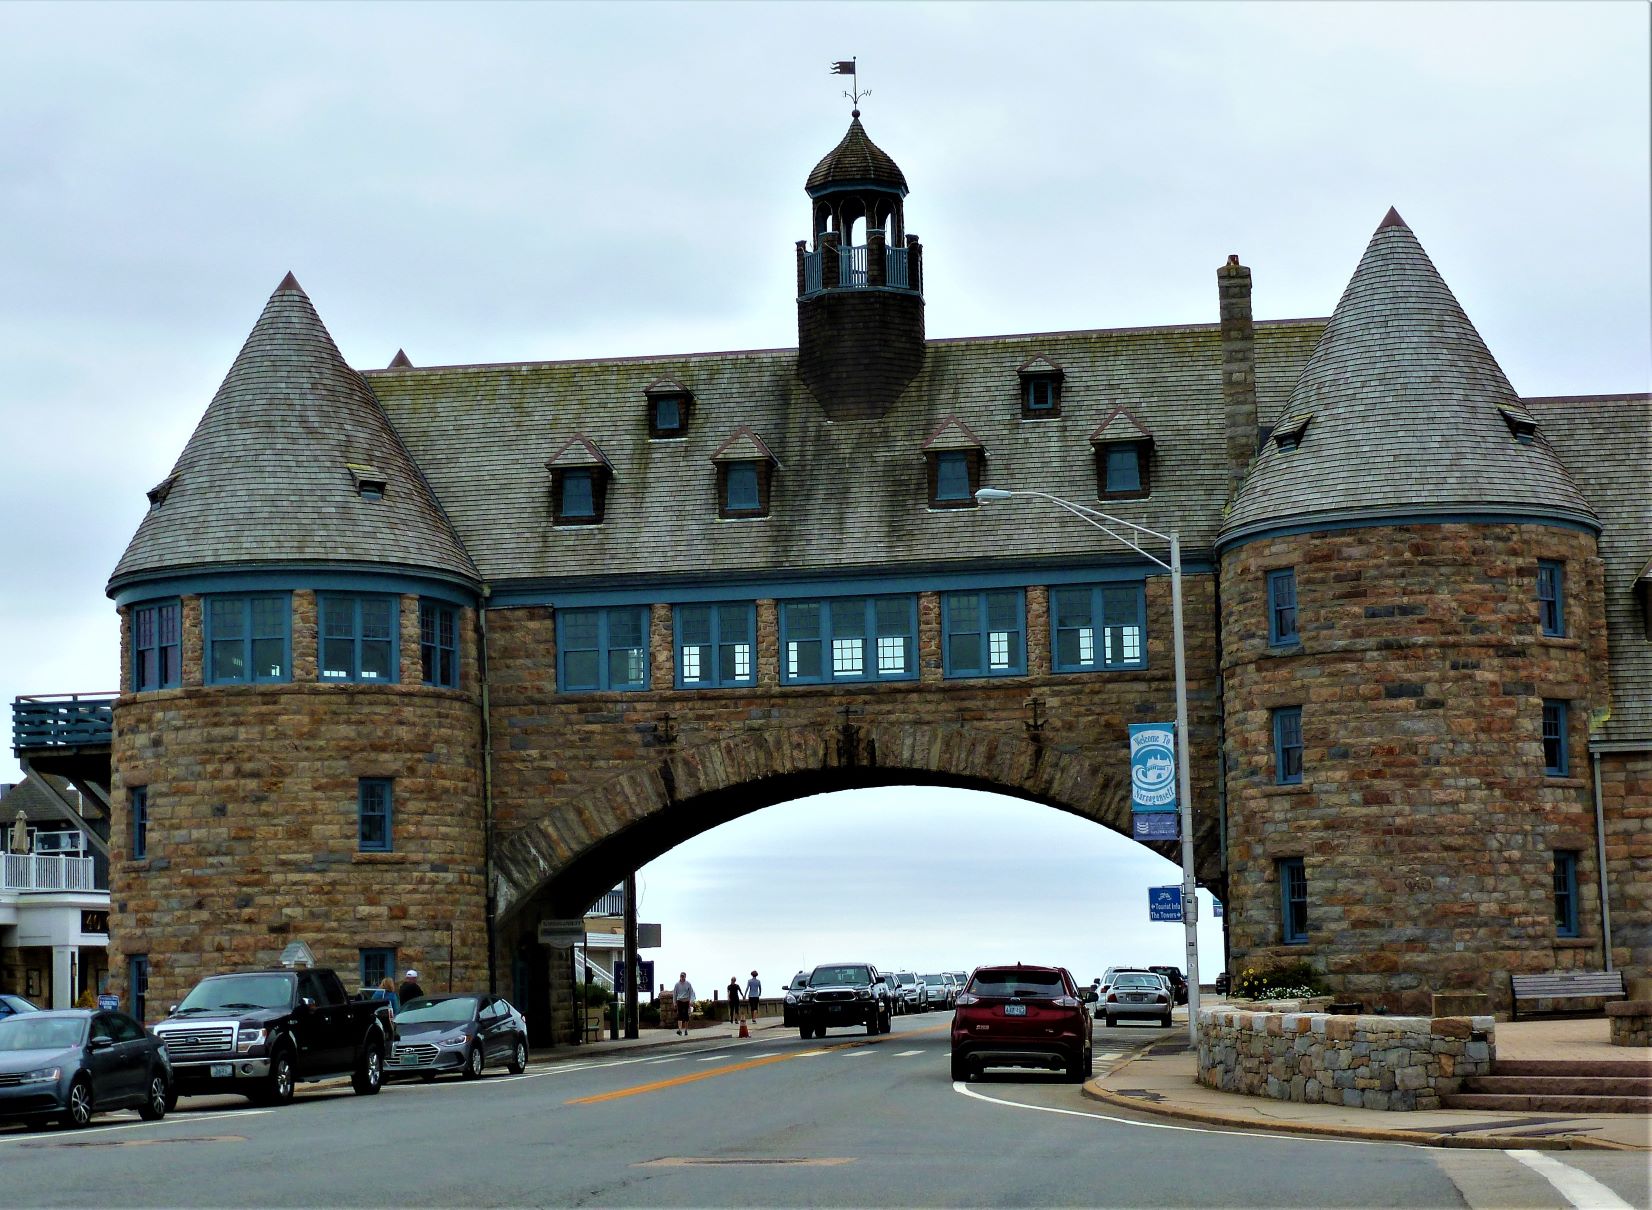 The historic Towers building in Narragansett, R.I.